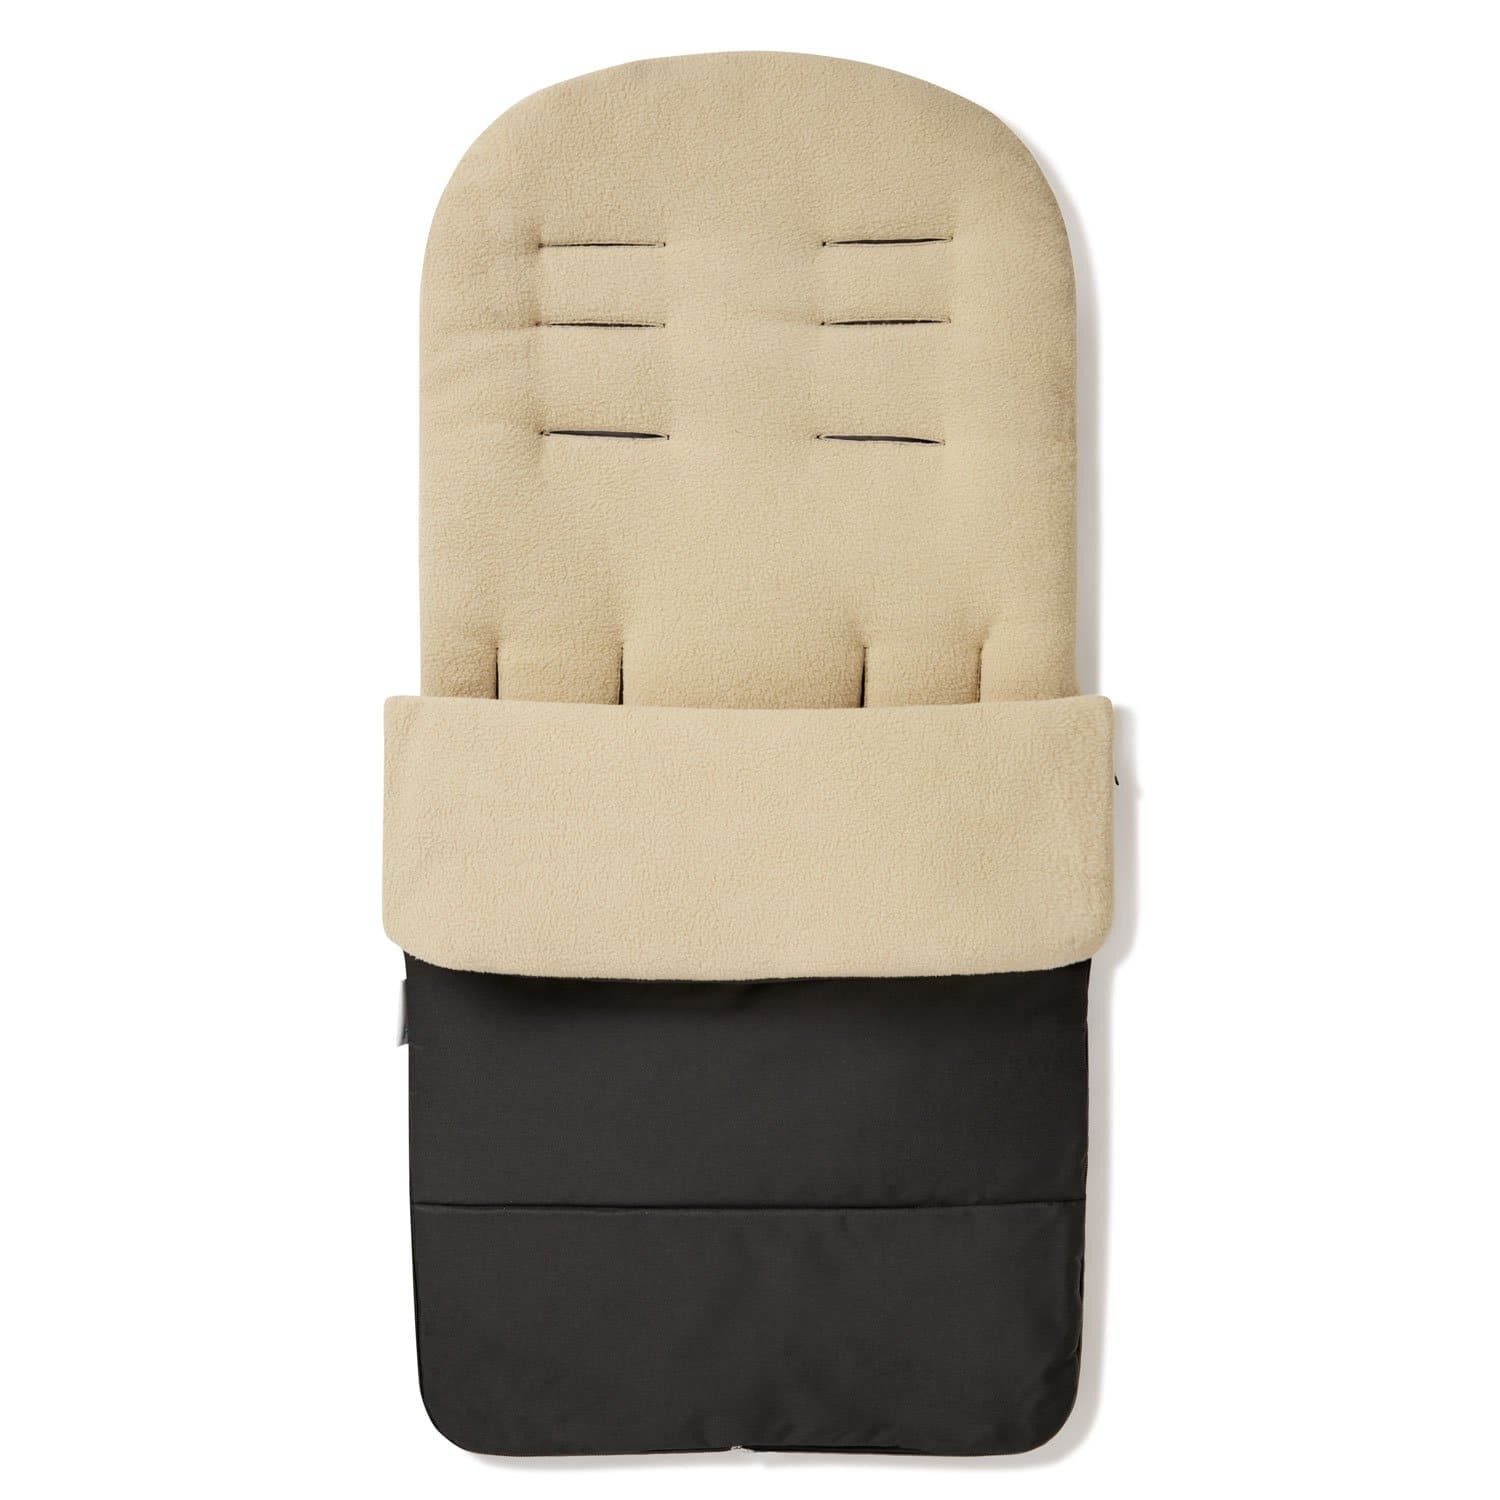 Premium Footmuff / Cosy Toes Compatible with Mee-Go - Desert Sand / Fits All Models | For Your Little One